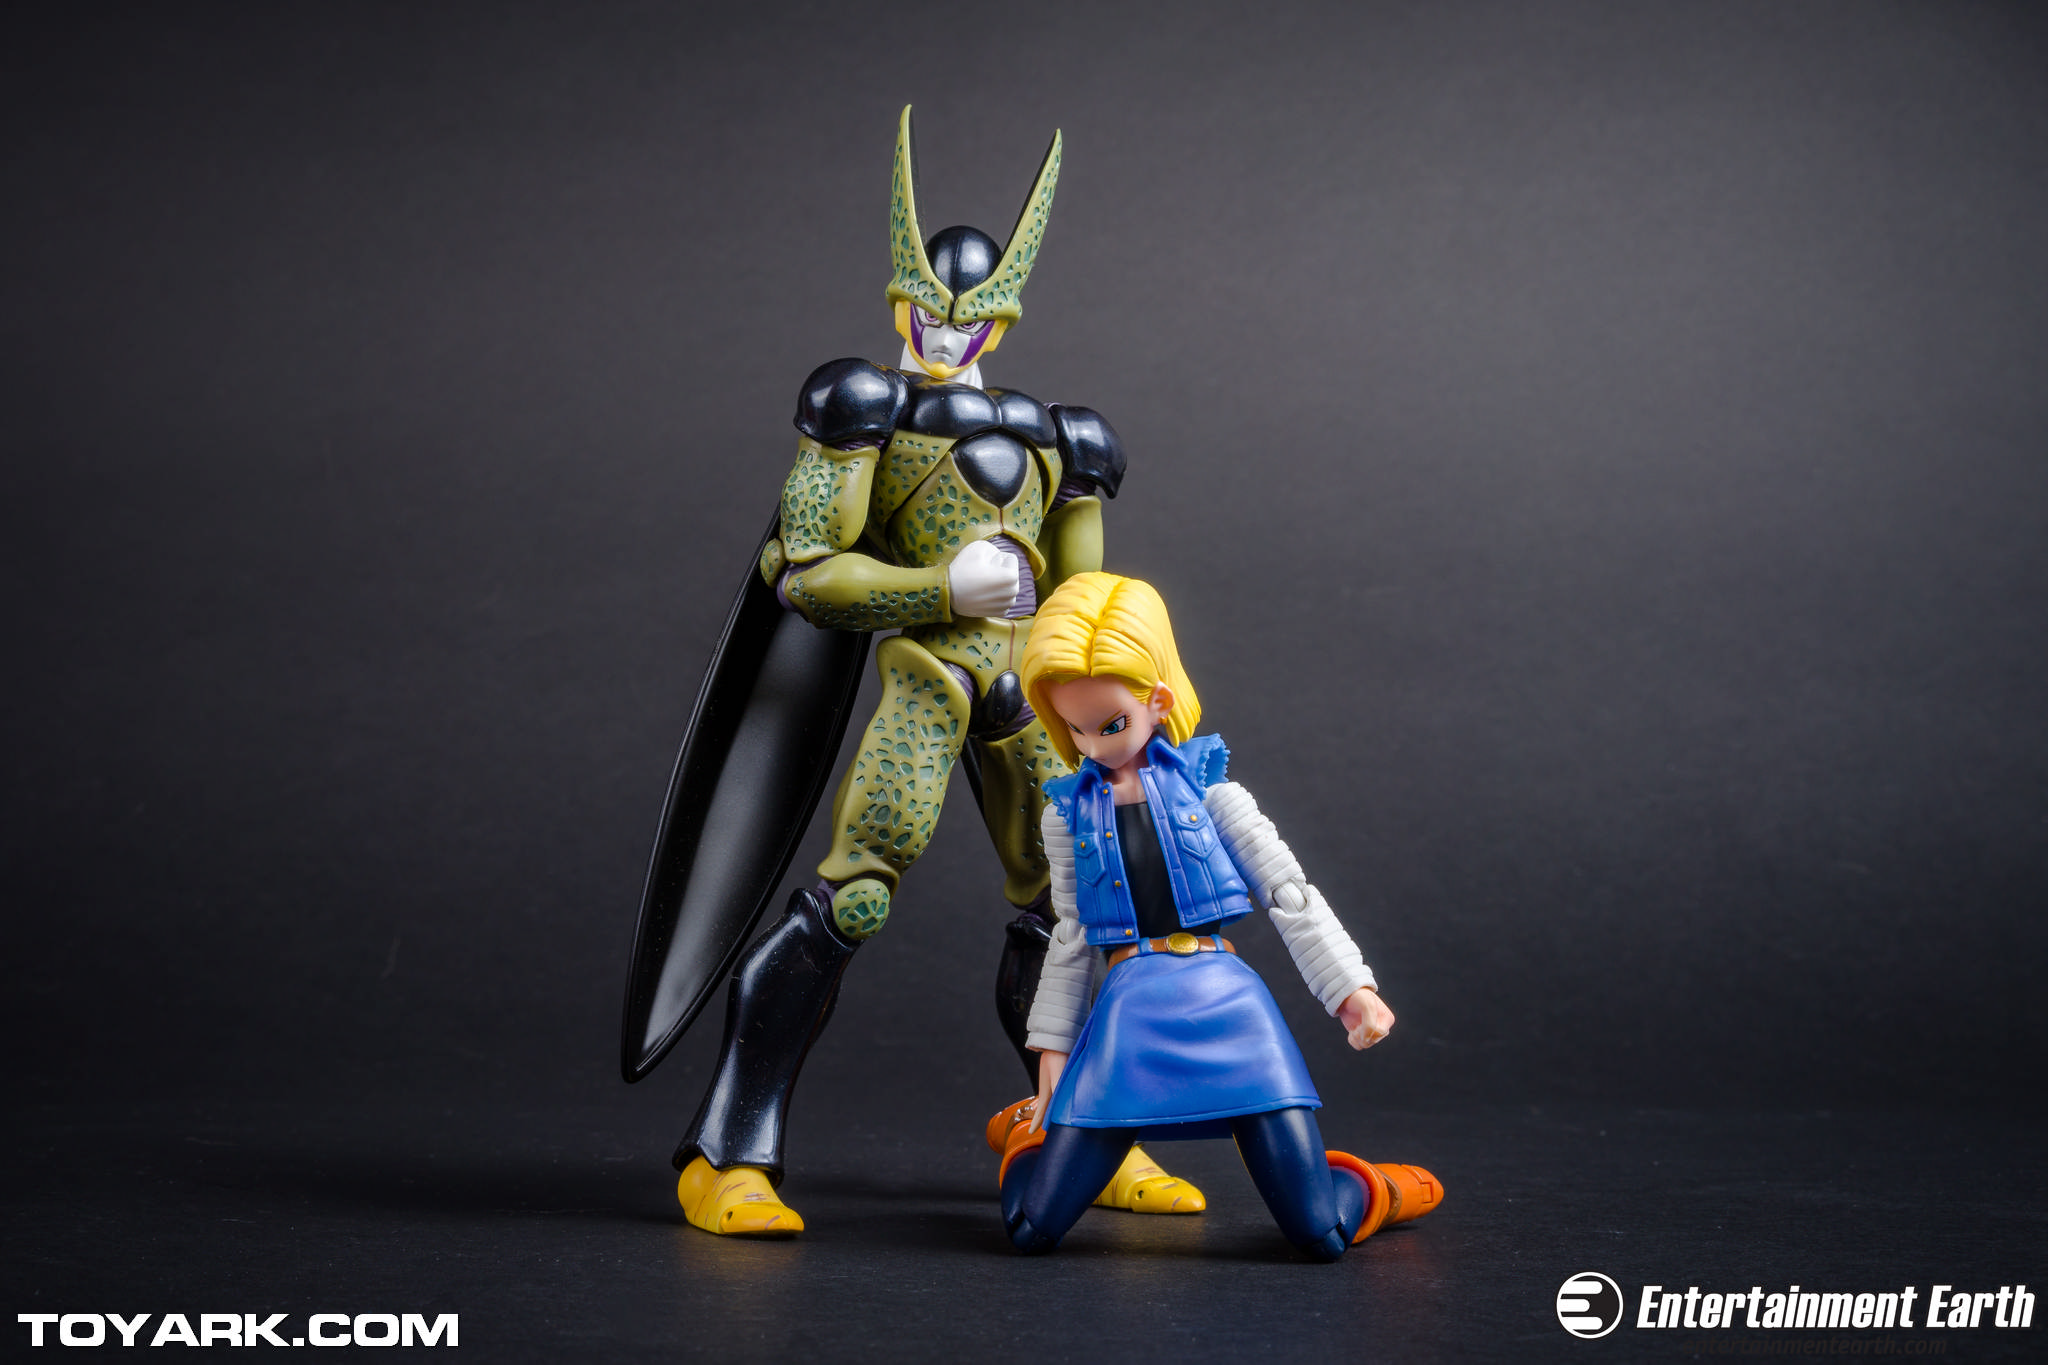 Figuarts-Android-18-35.jpg